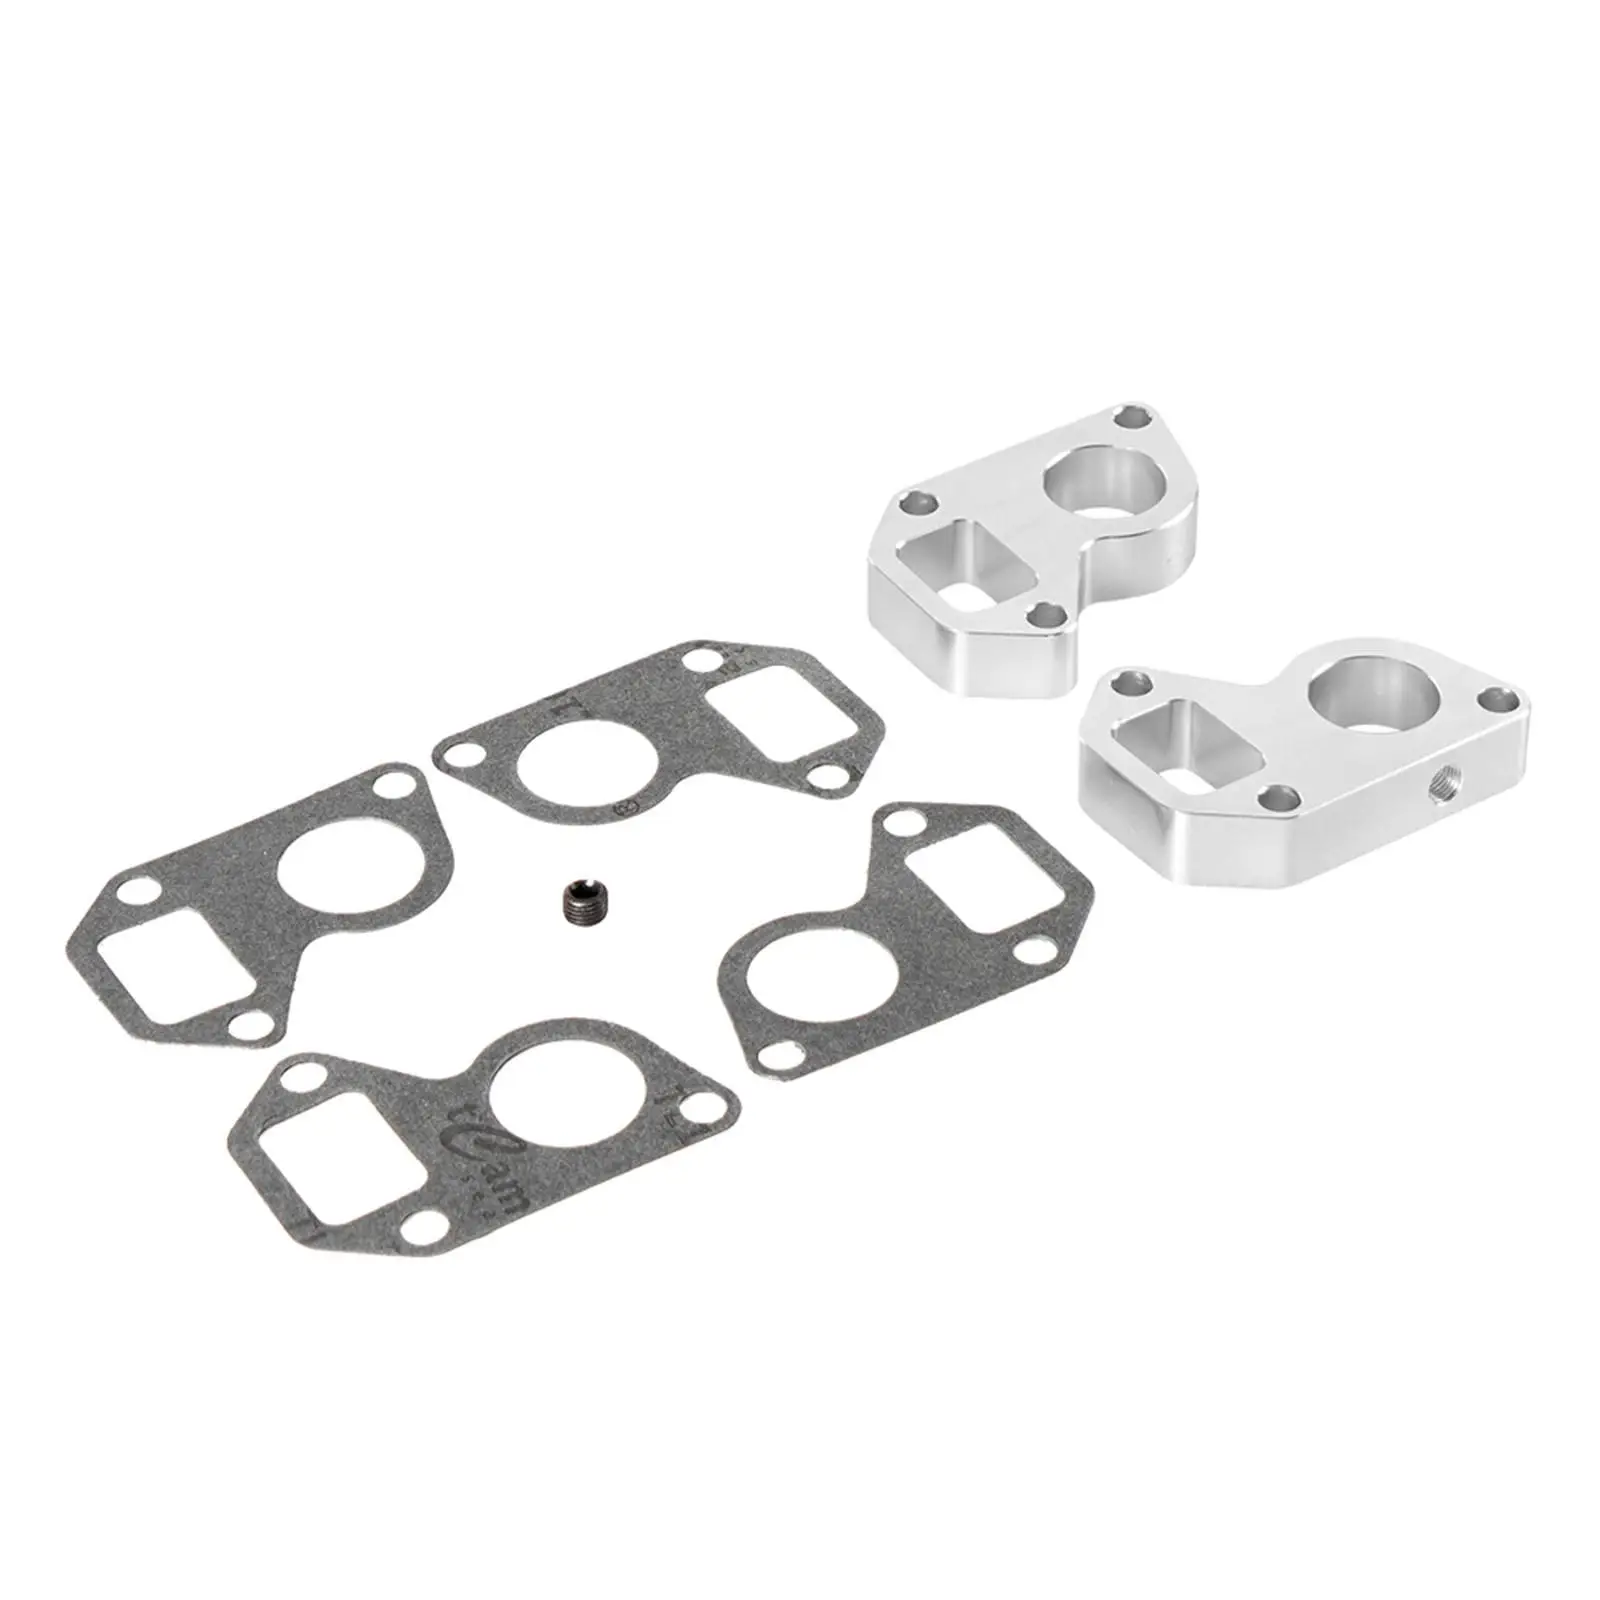 1 Set Water Pump Spacer Truck Adapter Swap Kit, for LS1 Spare Parts Replace Truck Accessories Durable